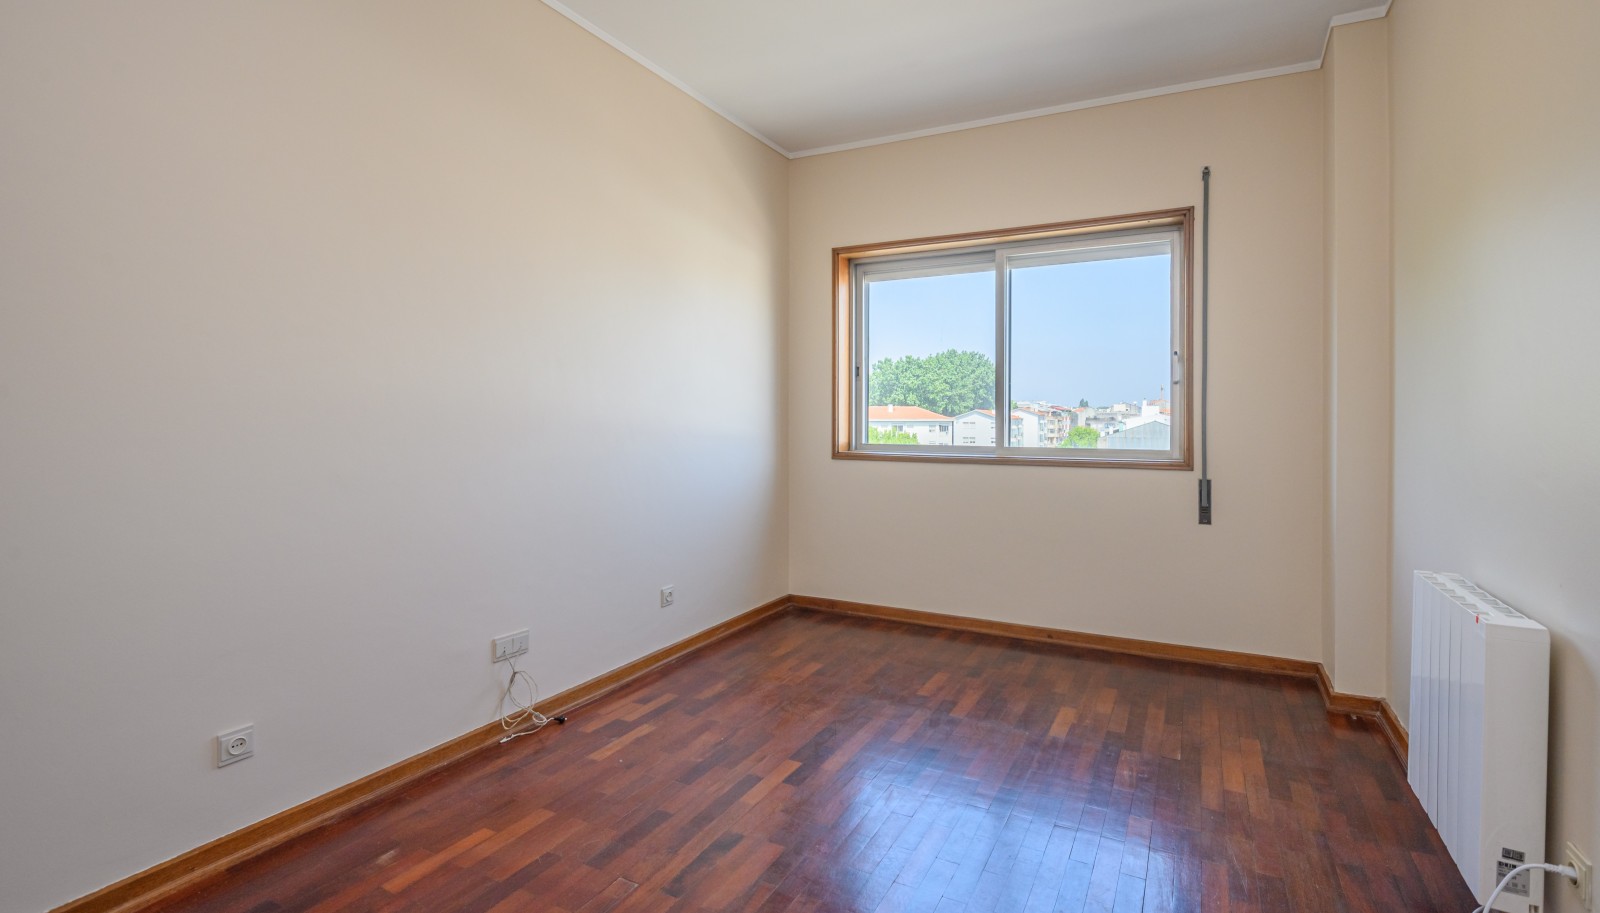 4 bedroom apartment with balcony, for sale, in Porto, Portugal_228365